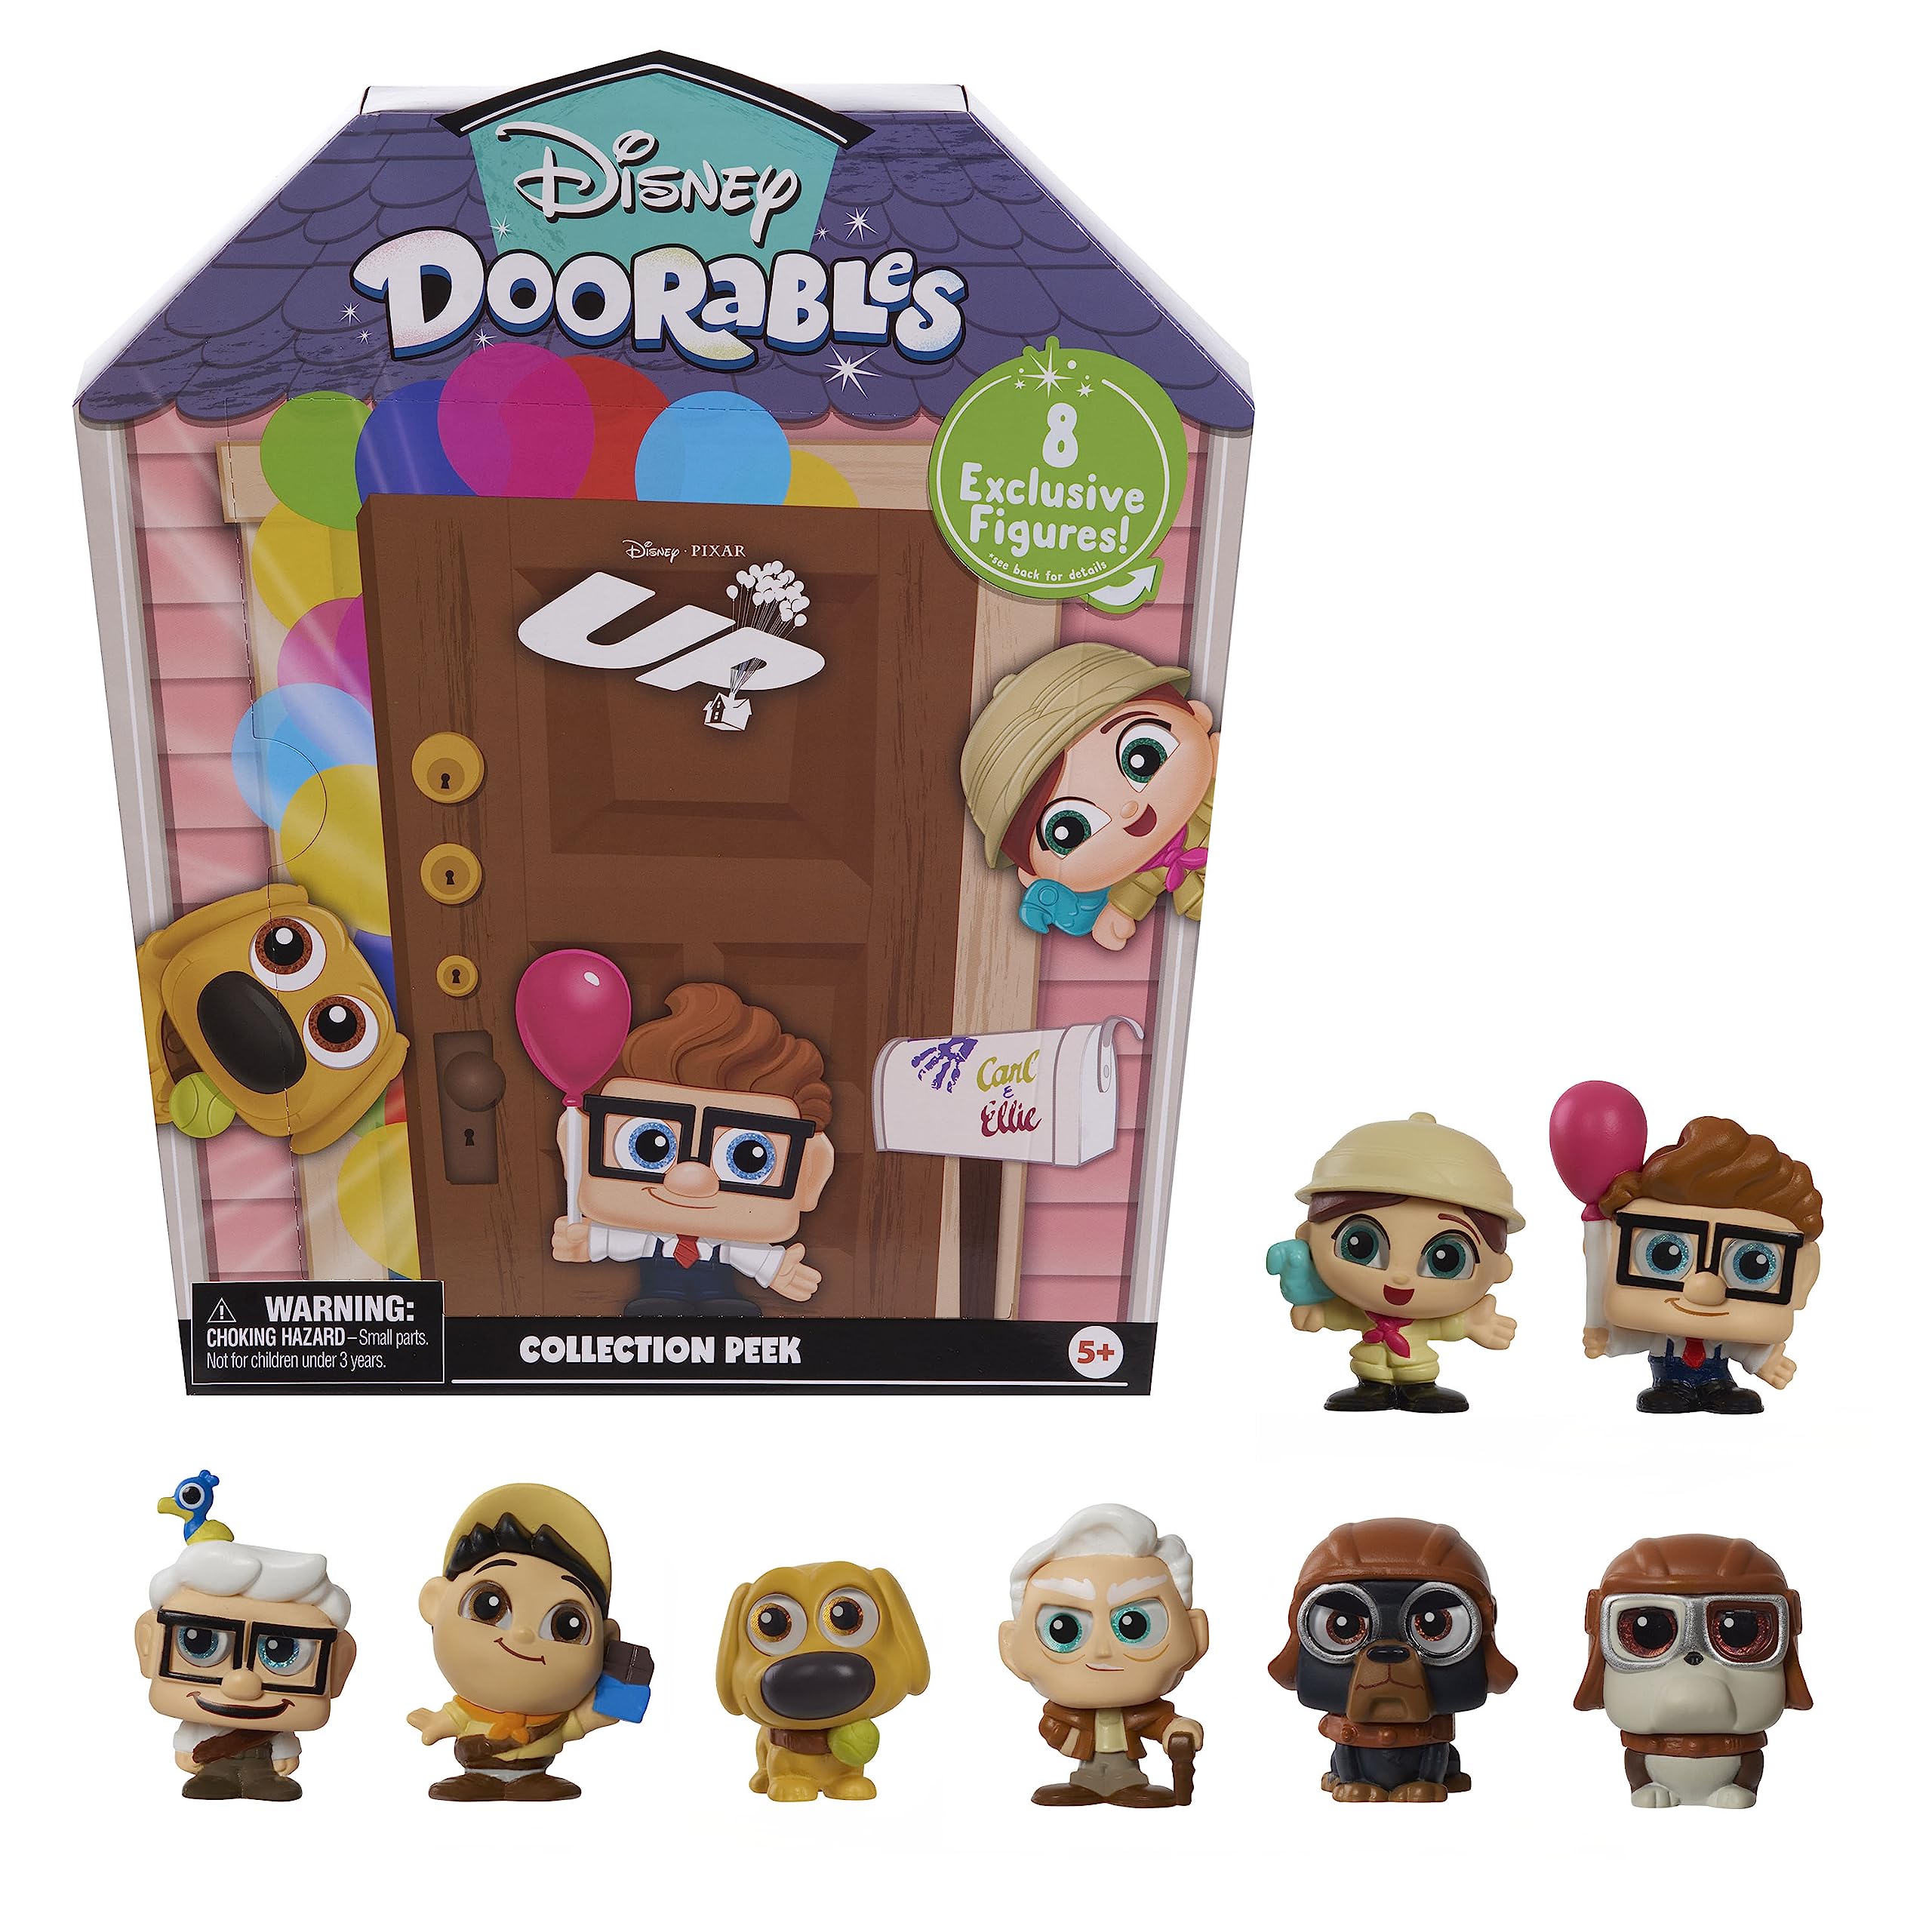 Disney Doorables New Up Collector Peek, Collectible Blind Bag Figures, Officially Licensed Kids Toys for Ages 5 Up, Gifts and Presents by Just Play